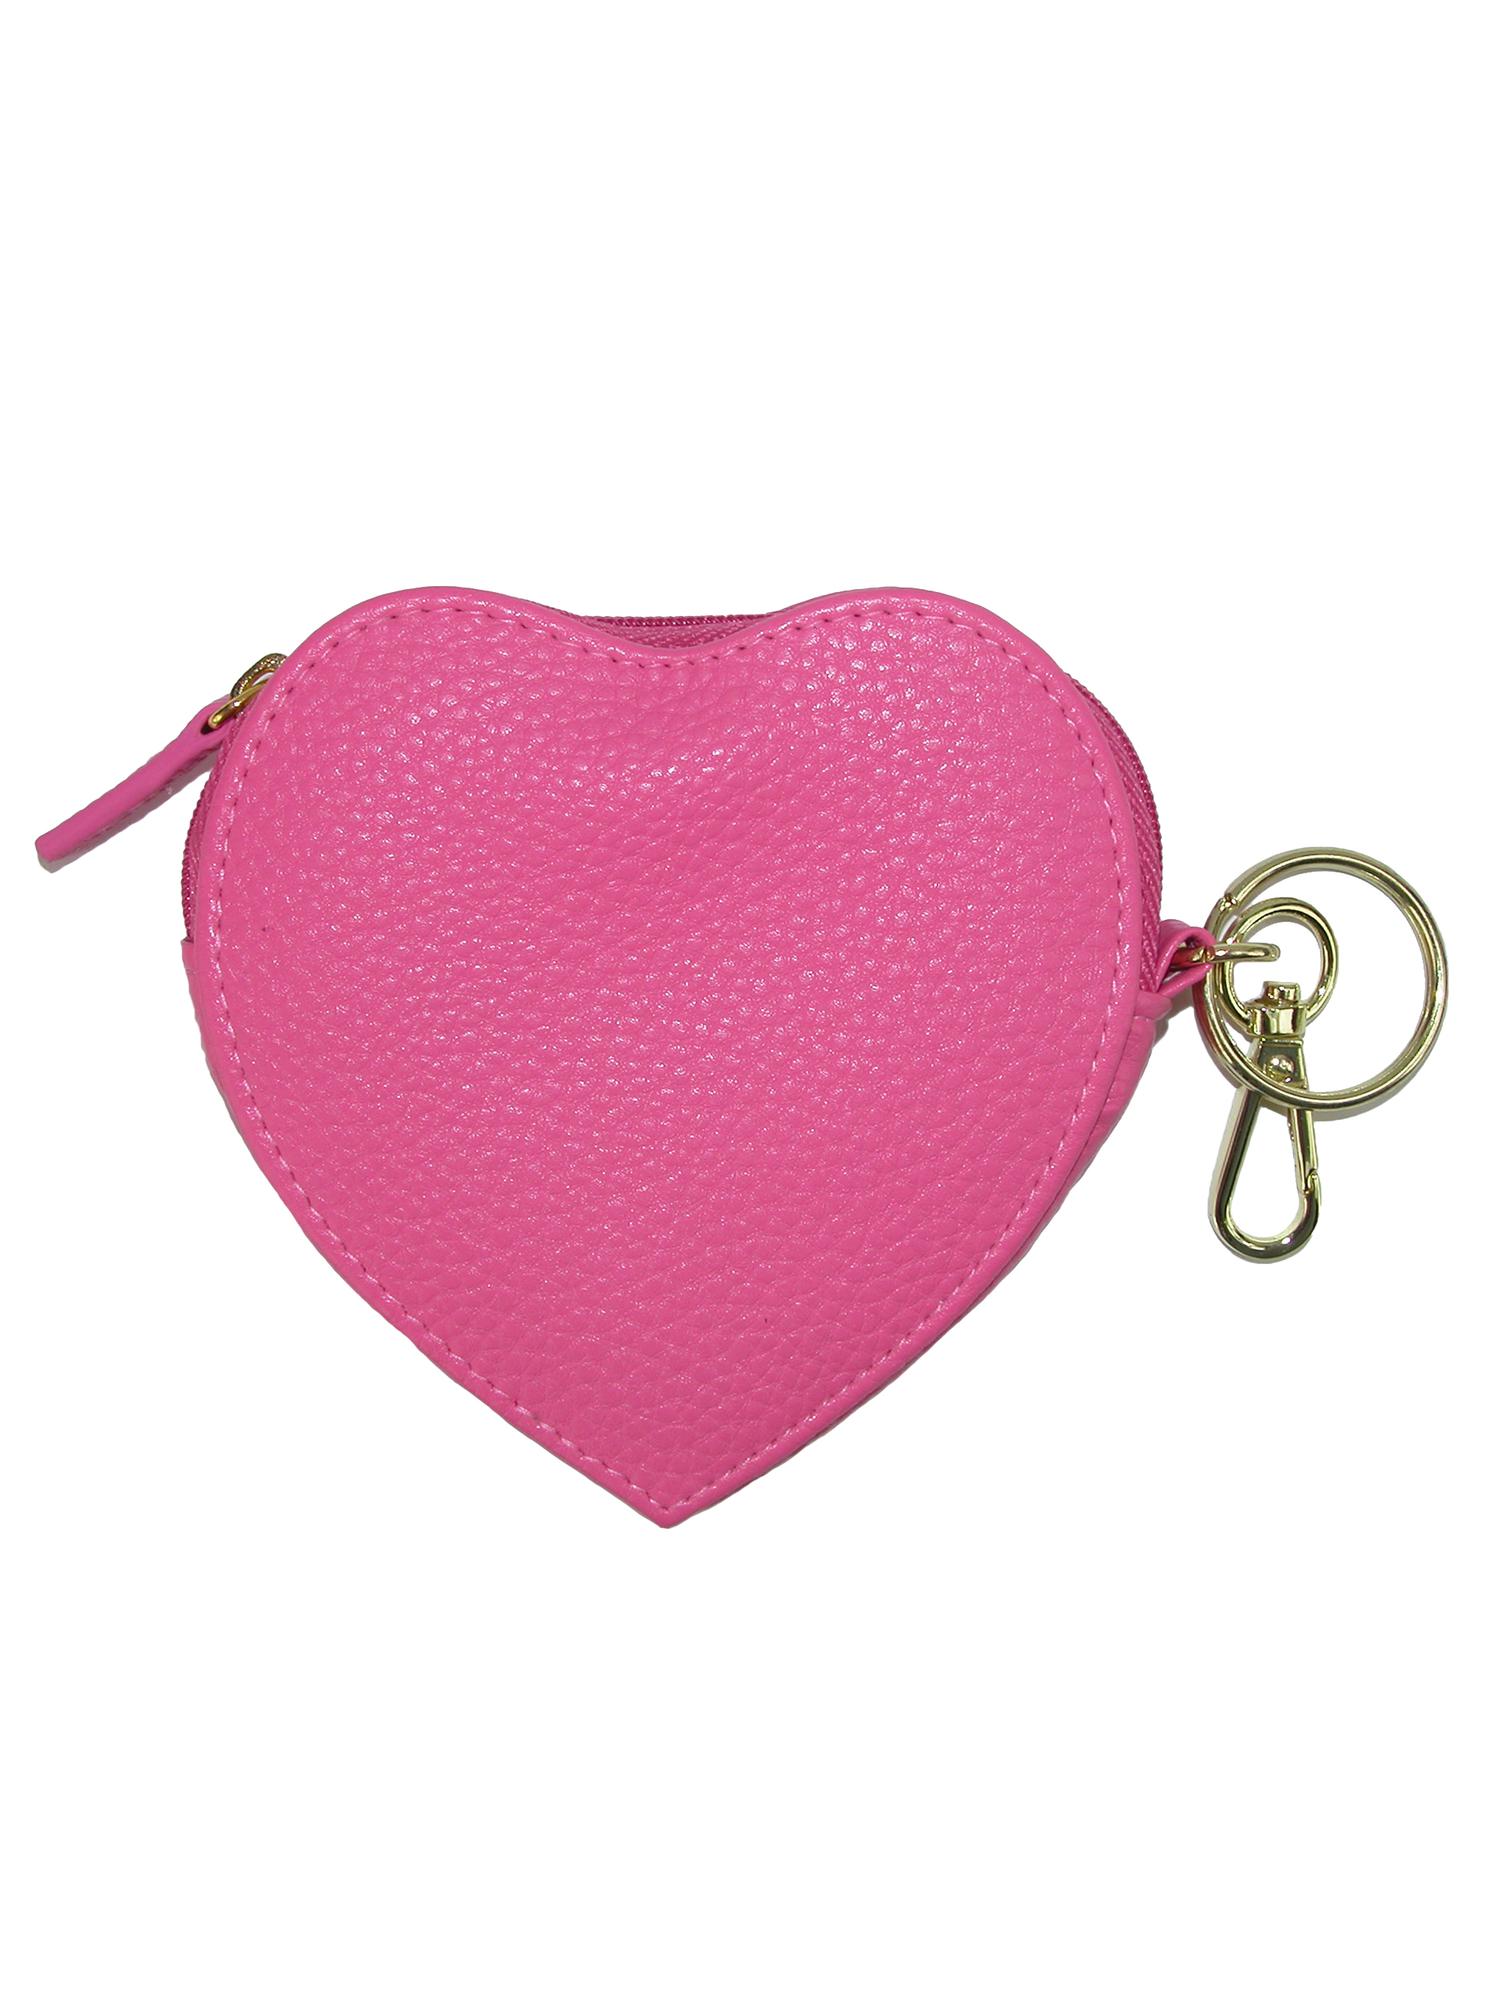 Heart-Shaped Sequined Zipper Wallet COTEY 6 PCS Heart-Shaped Crossbody Wallet Suitable for Children’s Travel Shopping Gathering 12x11.5cm Mini Childrens Sequined Coin Purse 